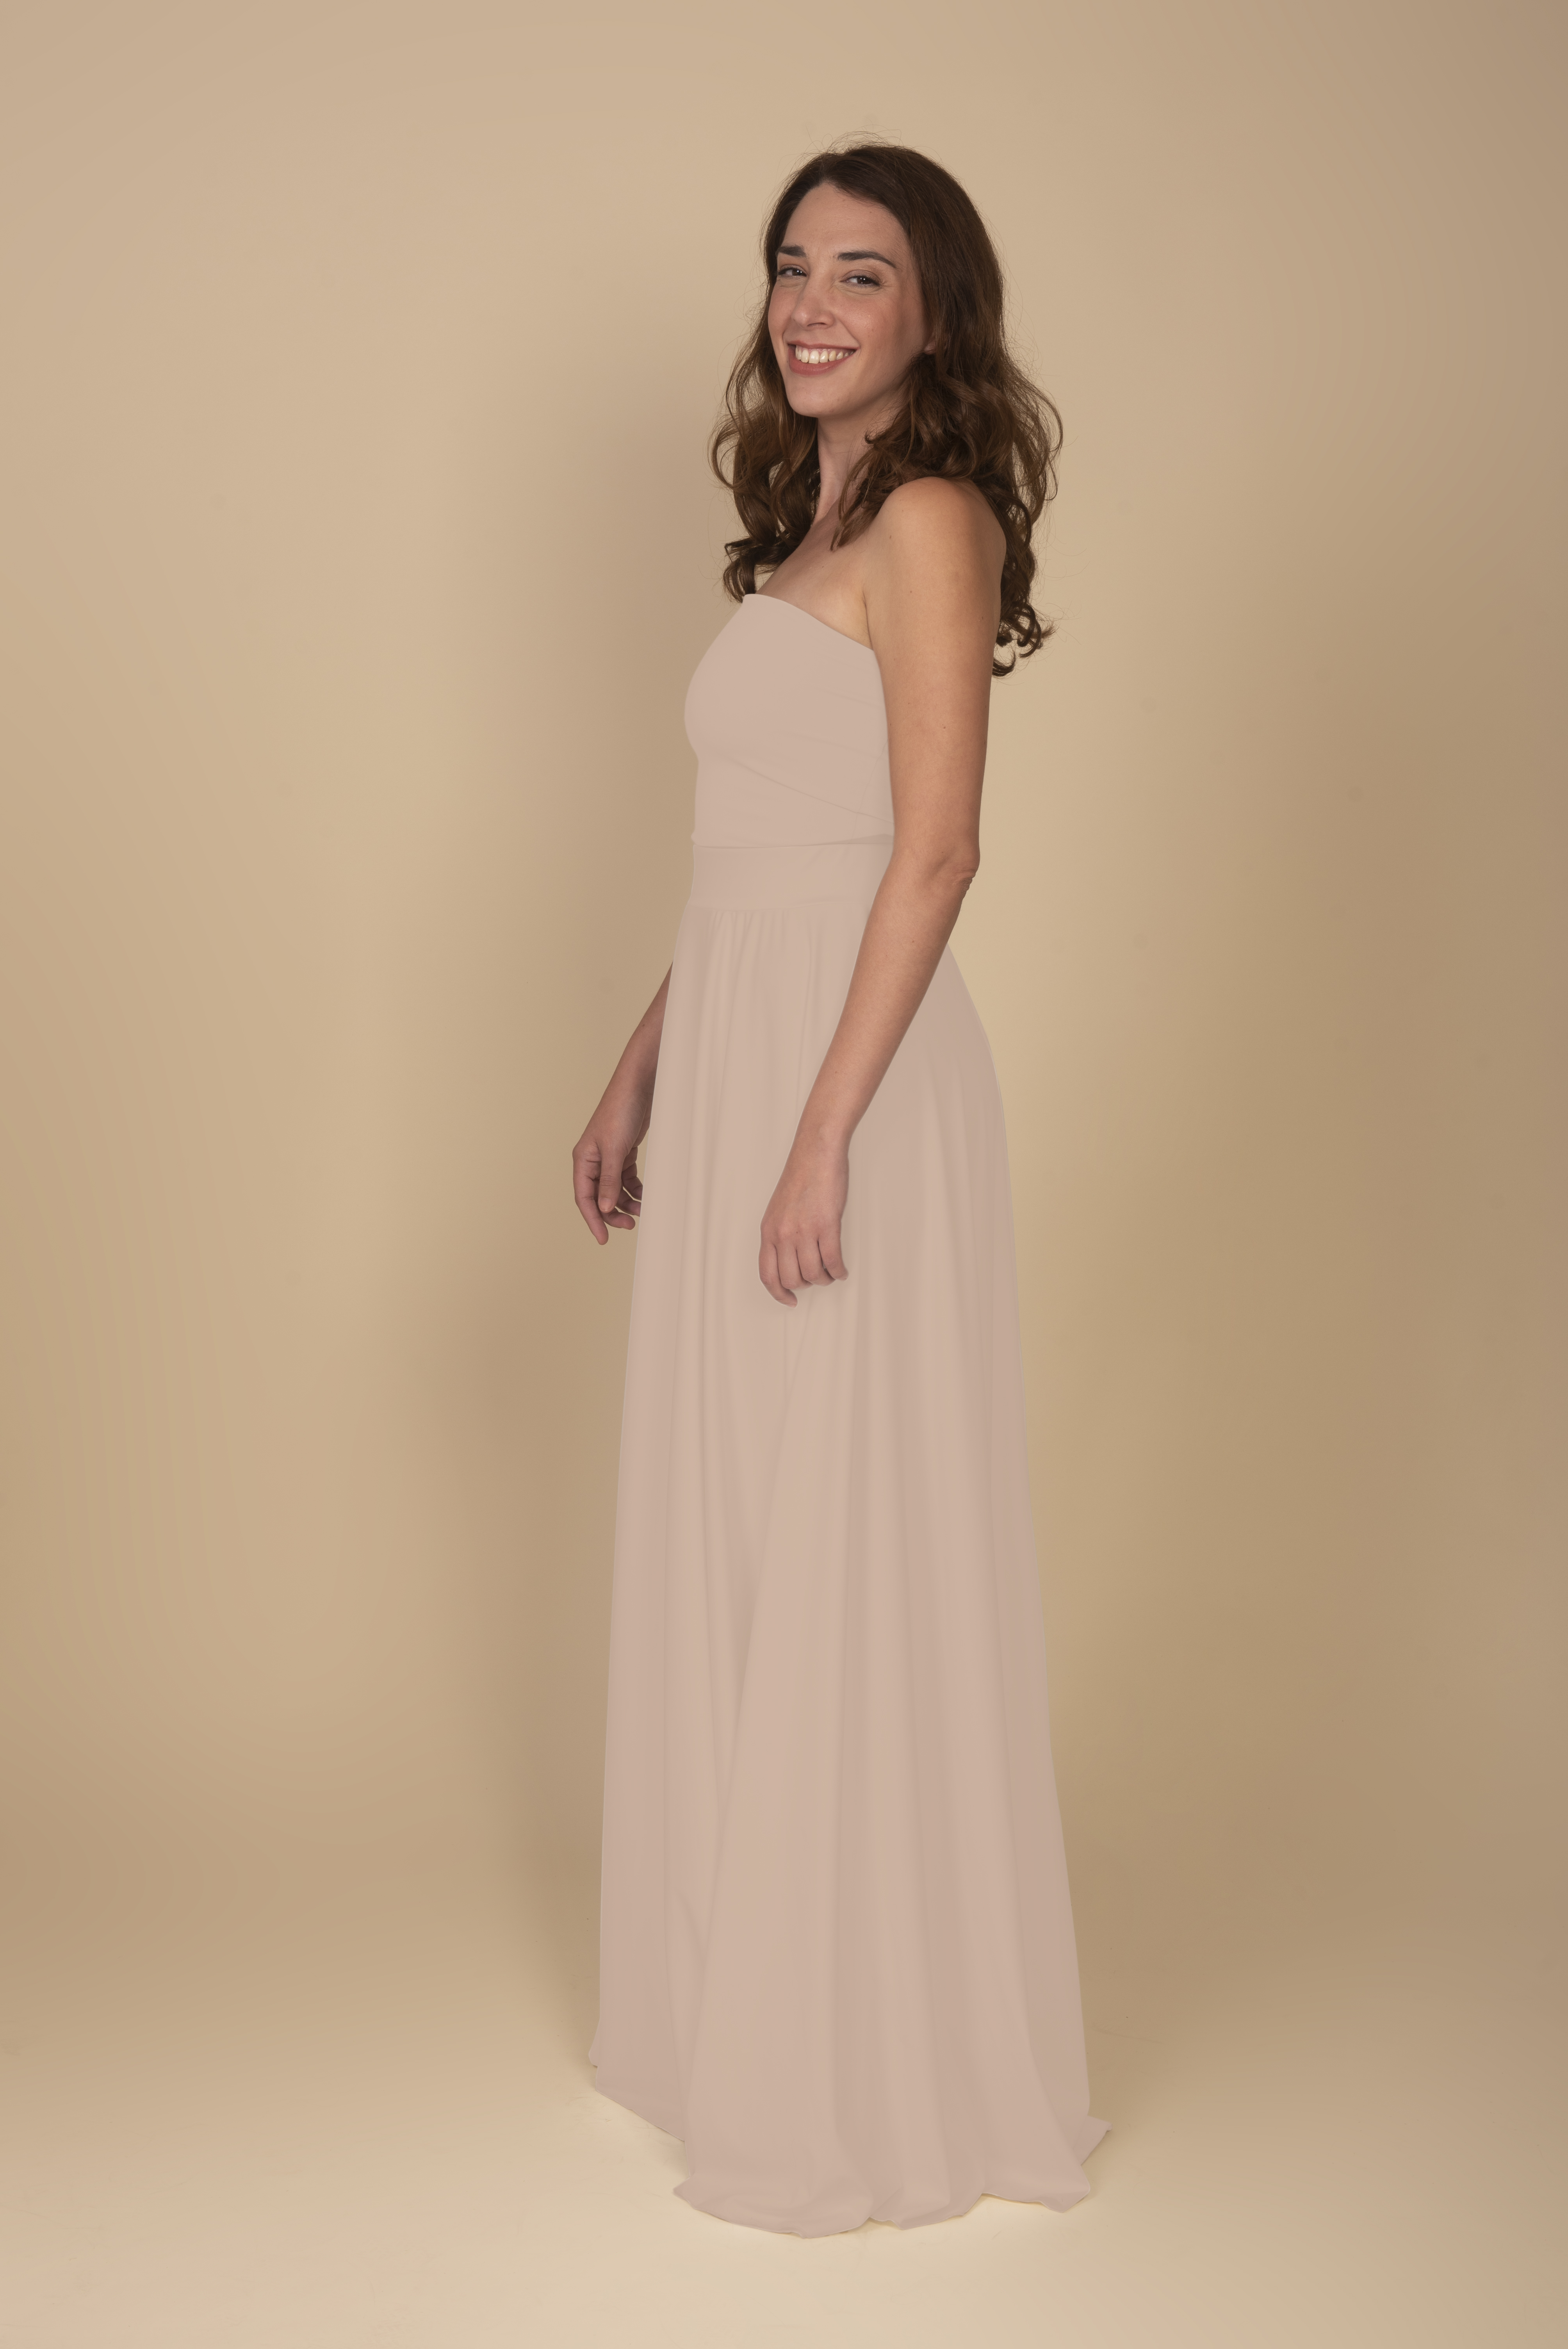 LONG SKIRT IN CHAMPAGNE by Infinit Barcelona